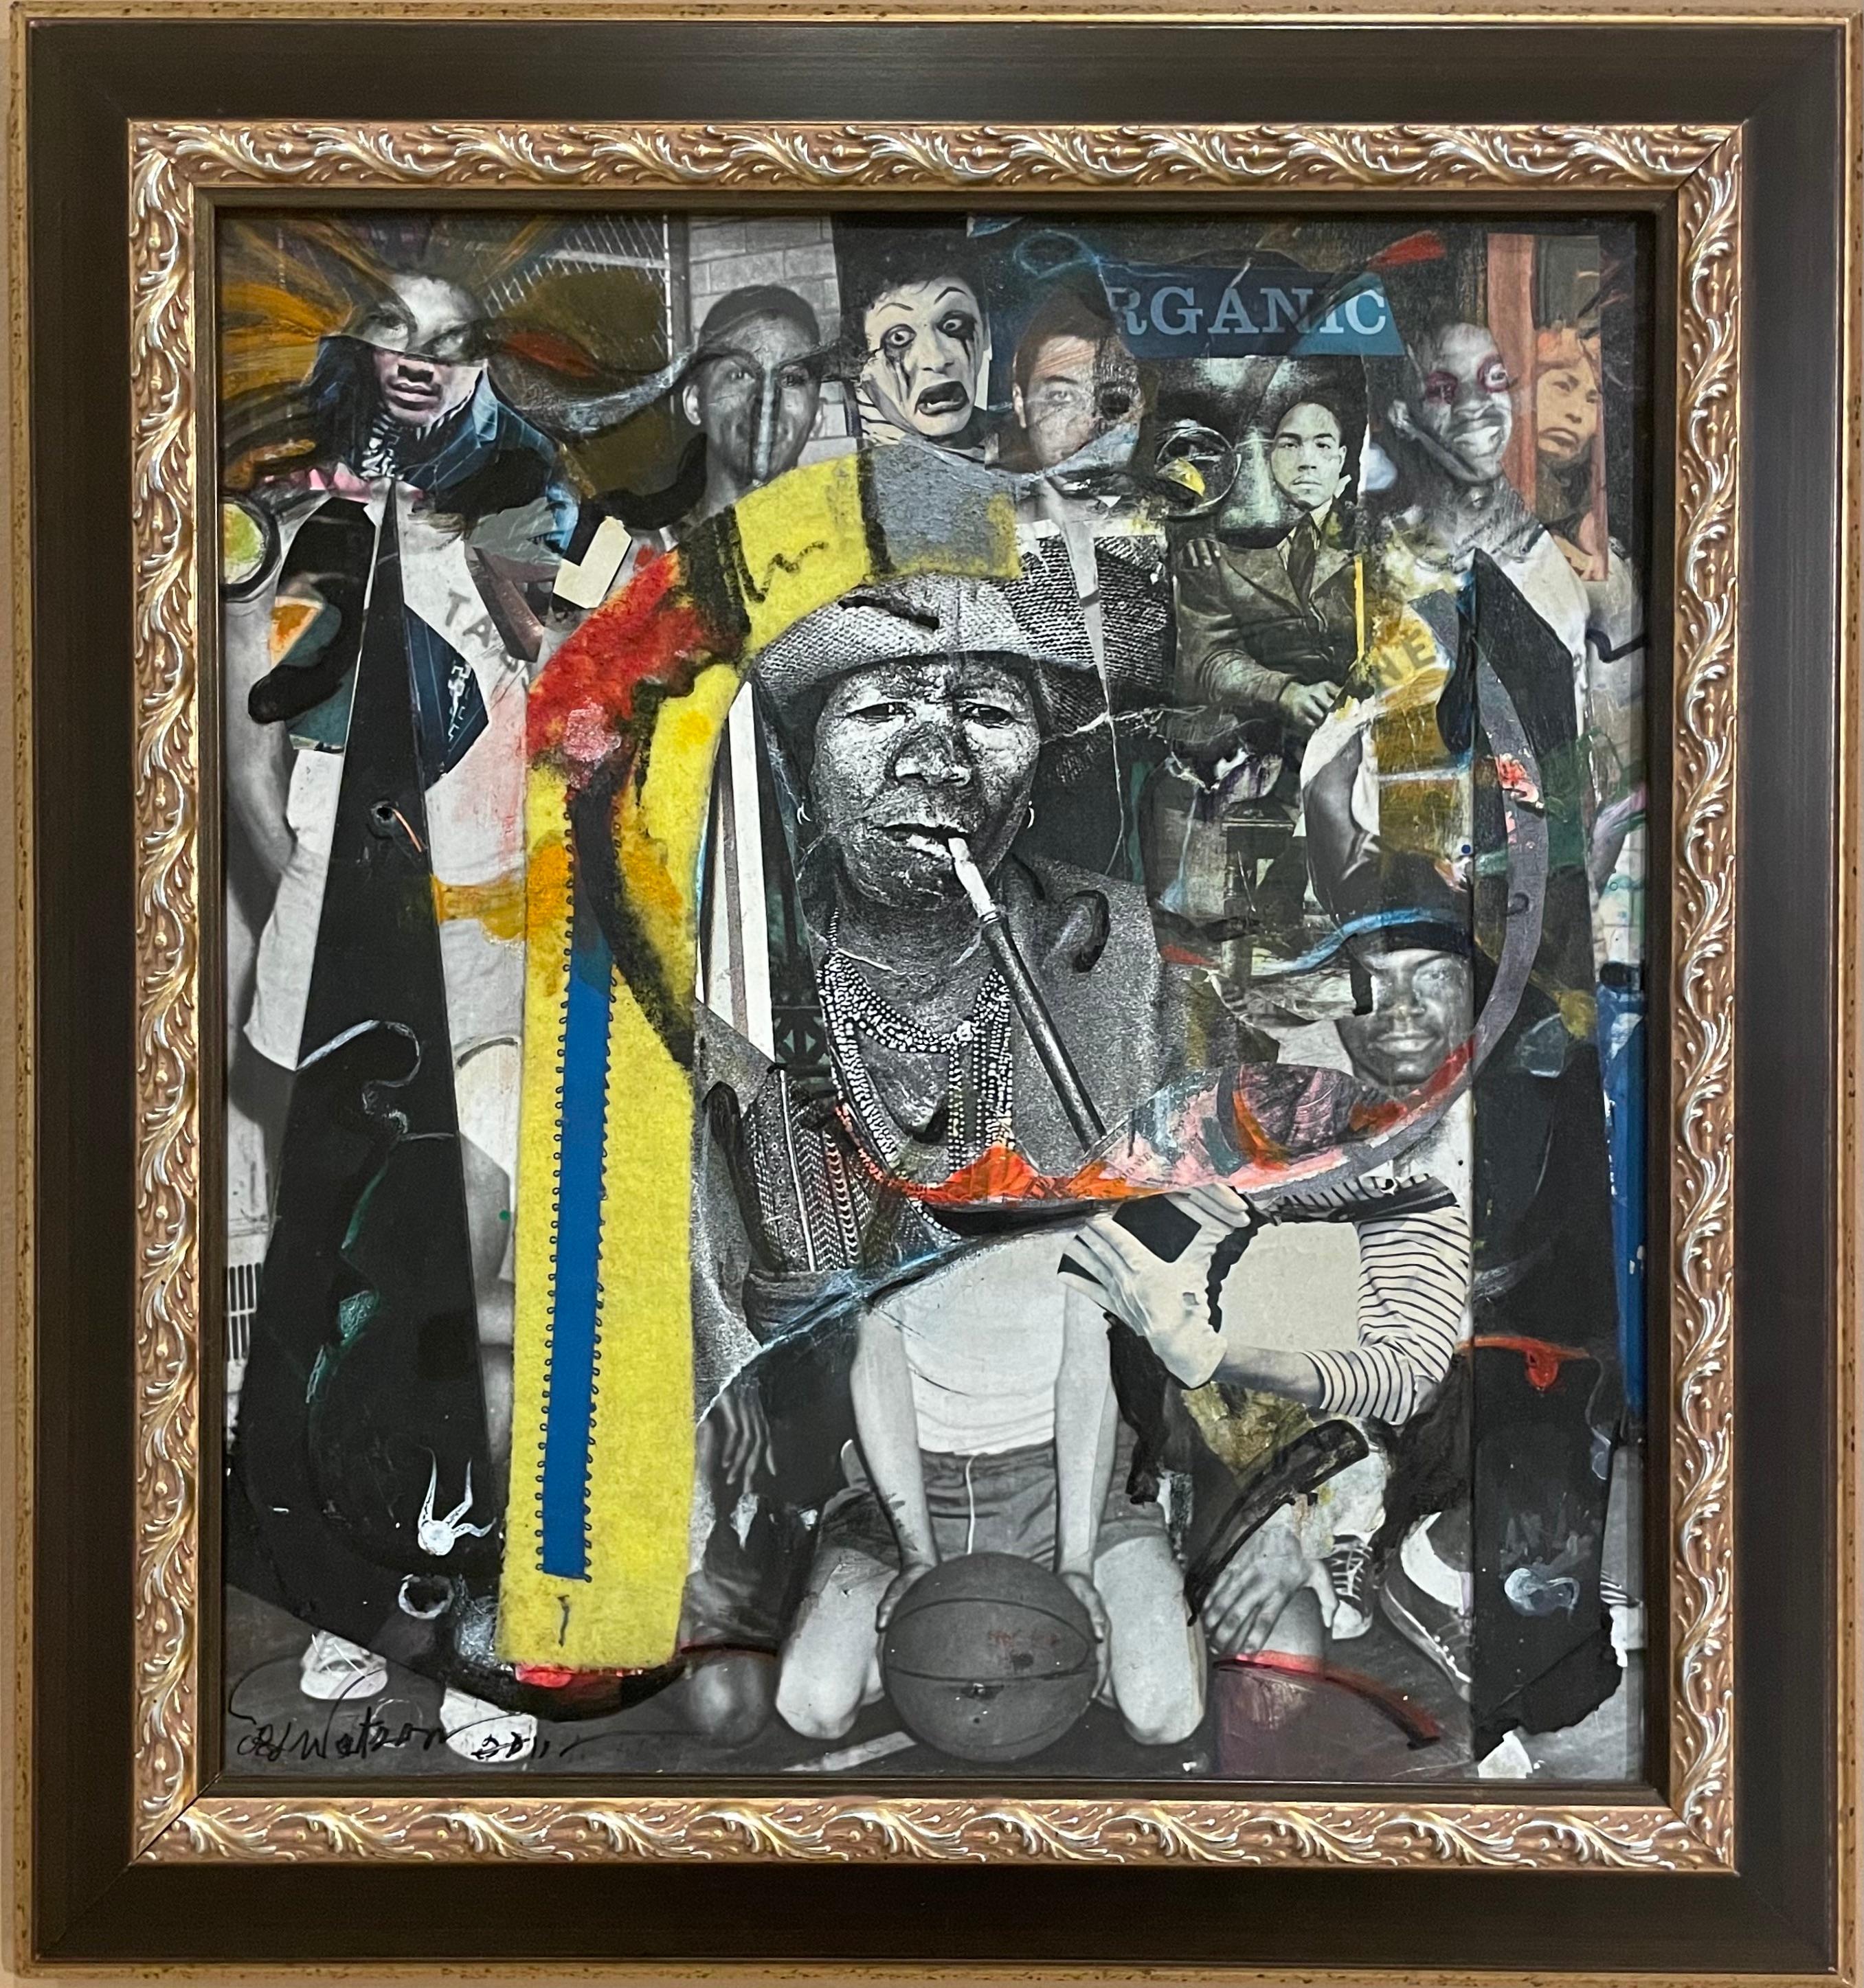 Richard J. Watson Figurative Painting - Pipe Dreams: African American collage painting w/ photographs figures, objects